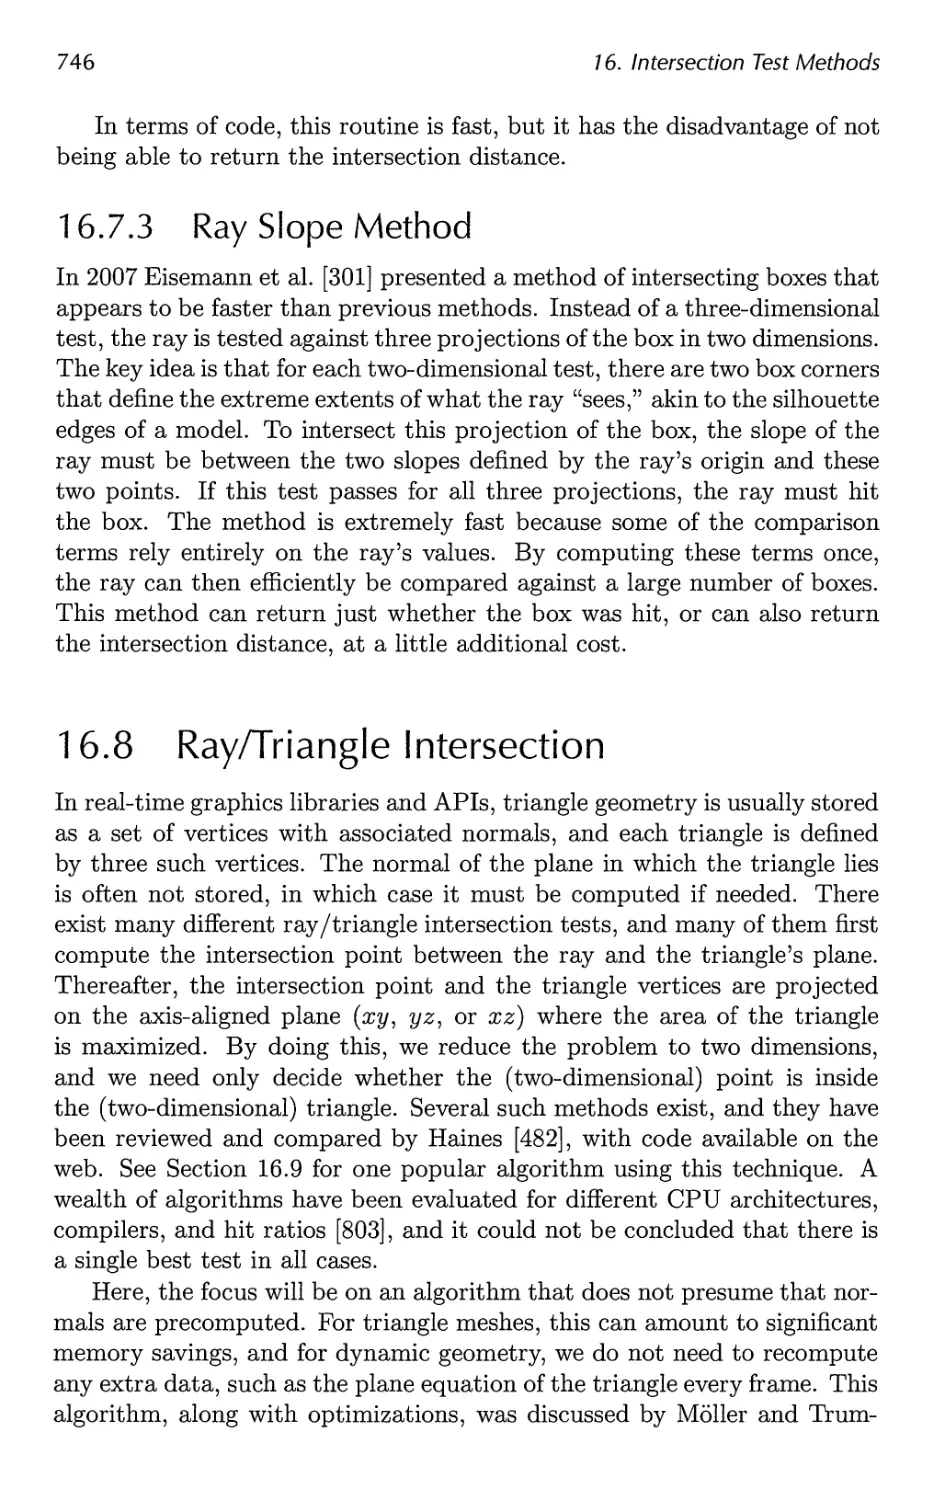 16.8 Ray/Triangle Intersection